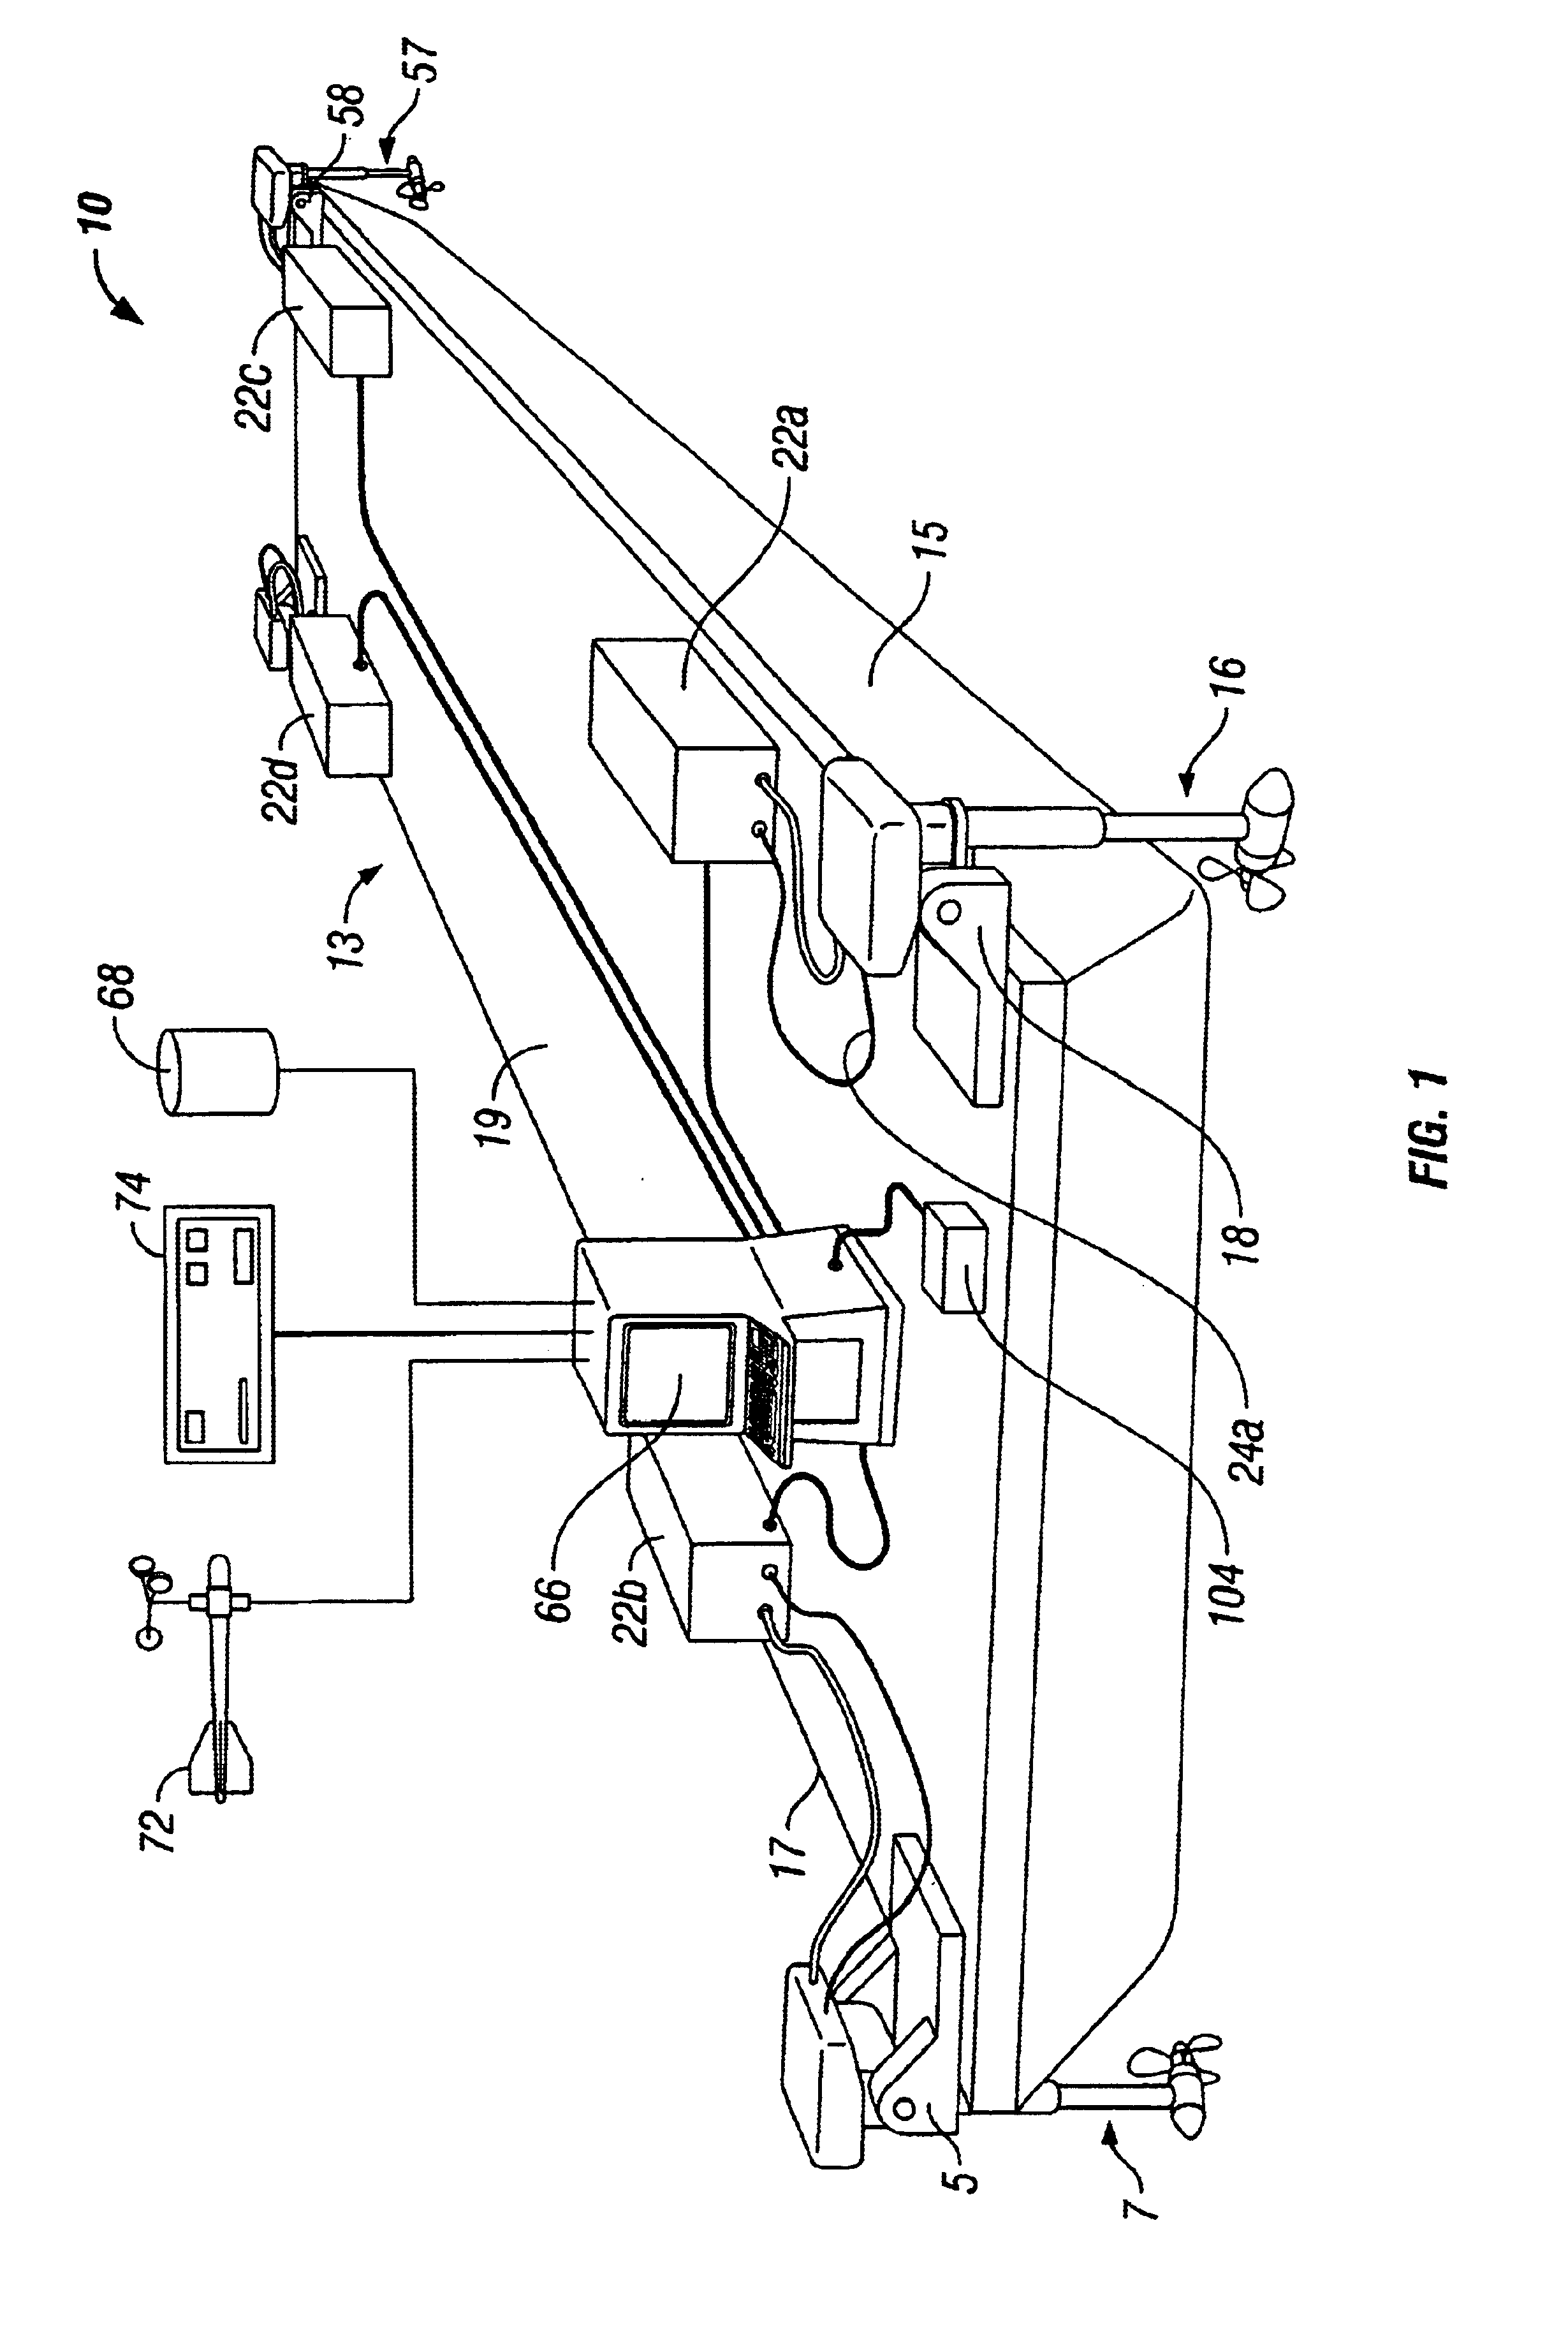 Portable dynamic positioning system with self-contained electric thrusters